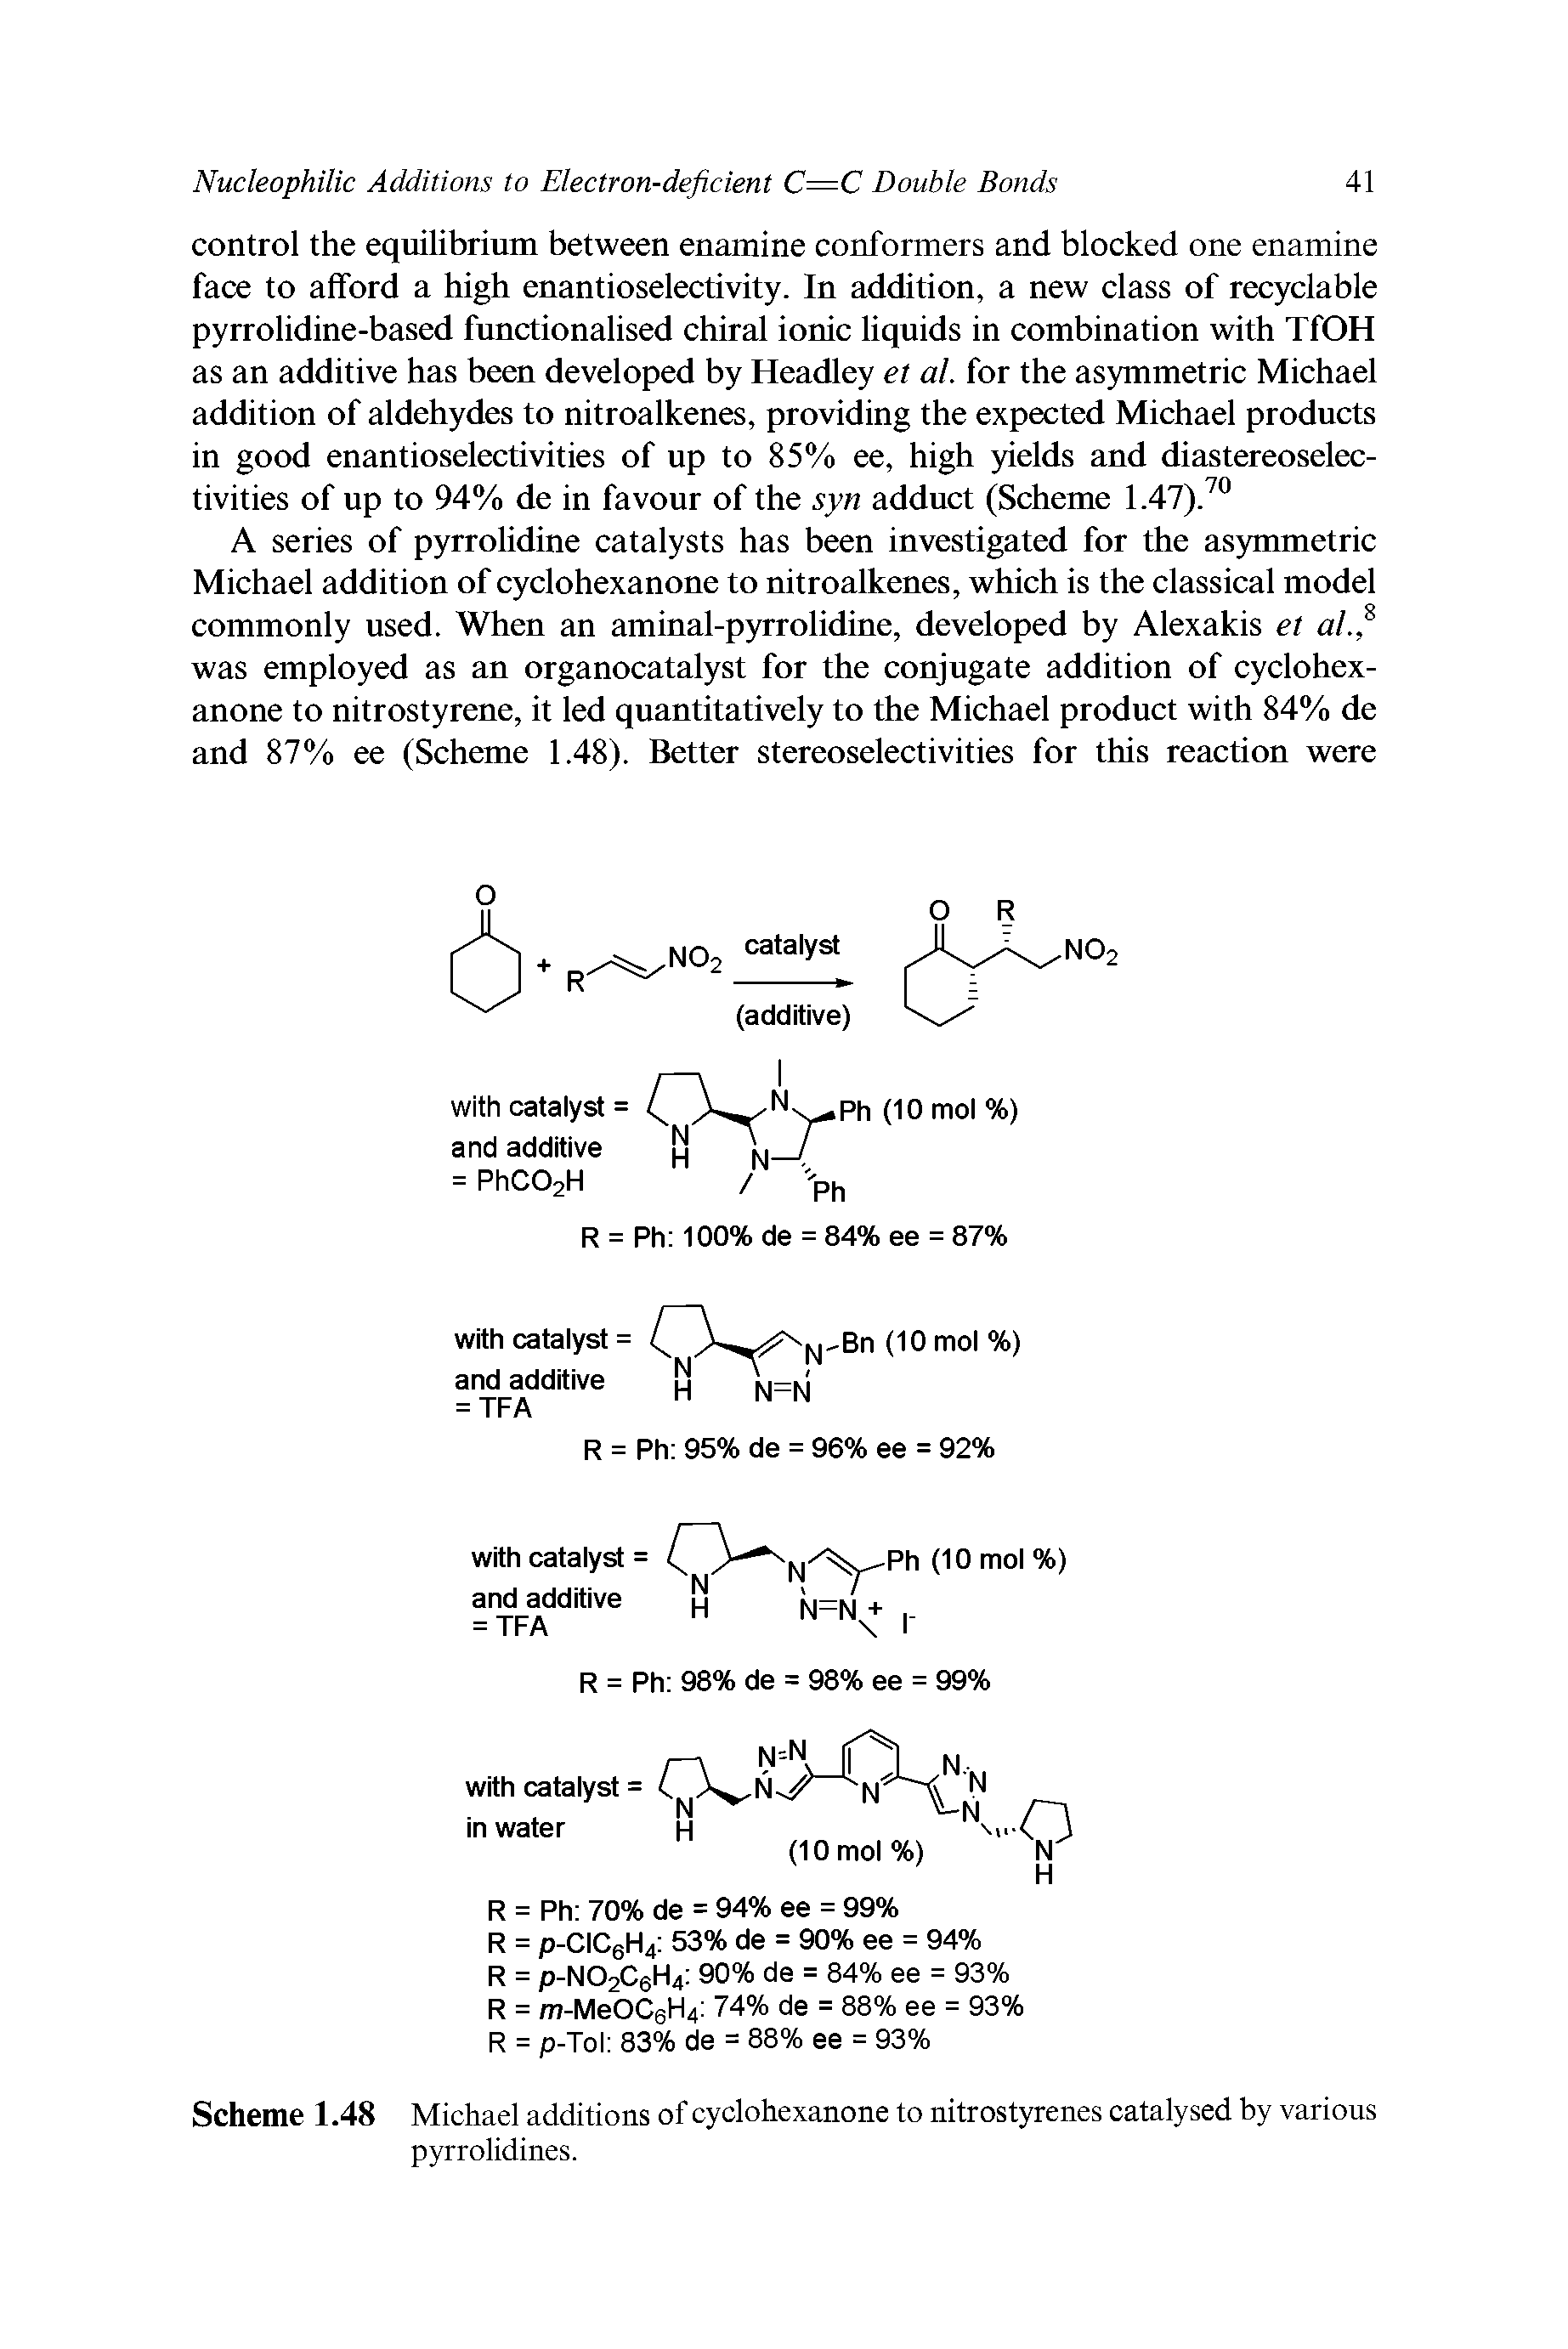 Scheme 1.48 Michael additions of cyclohexanone to nitrostyrenes catalysed by various pyrrolidines.